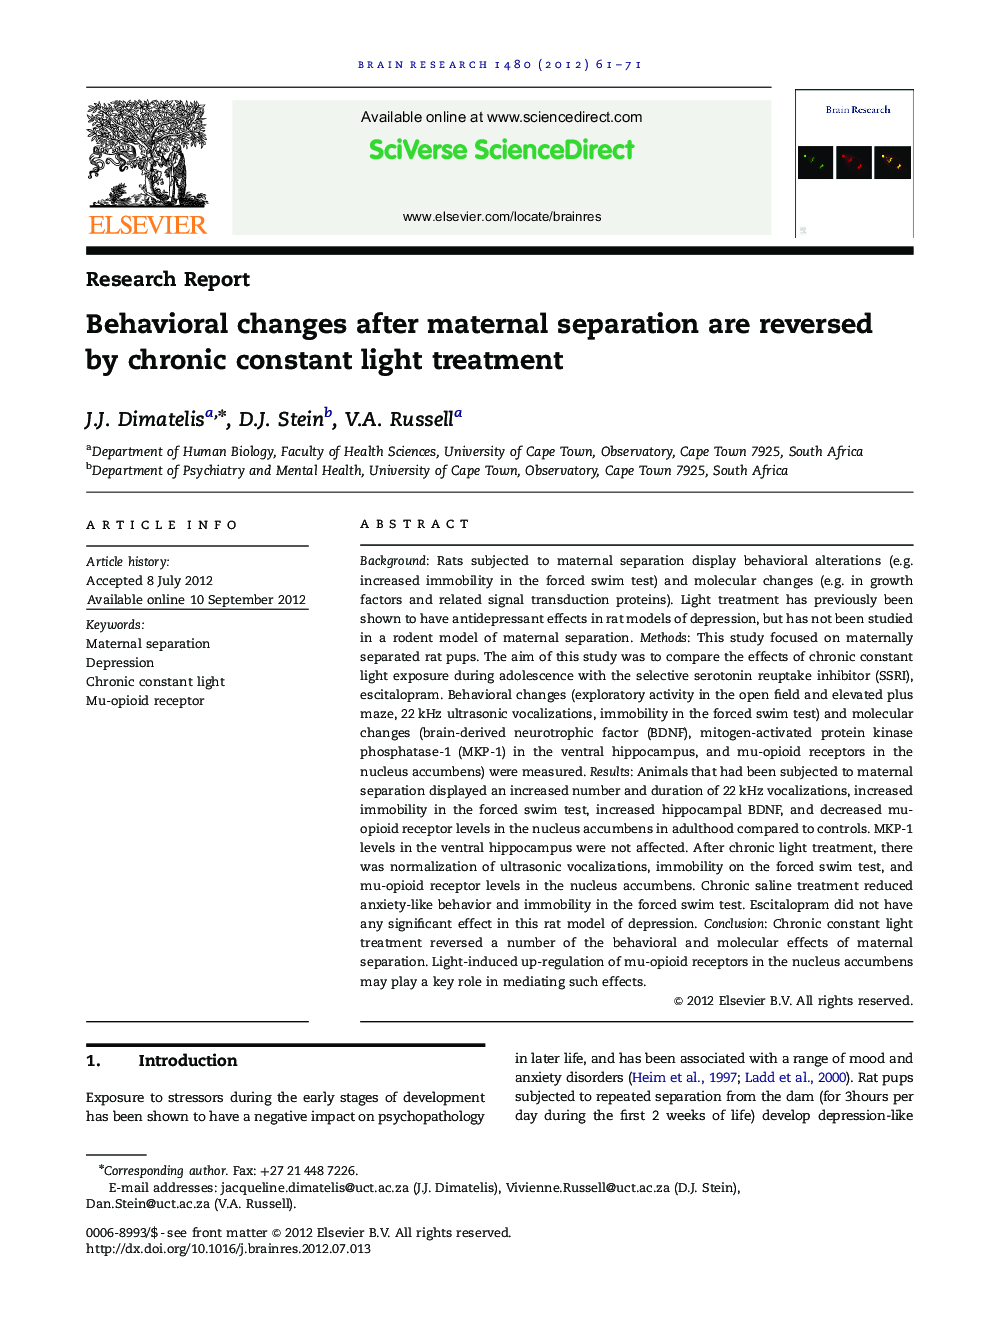 Research ReportBehavioral changes after maternal separation are reversed by chronic constant light treatment